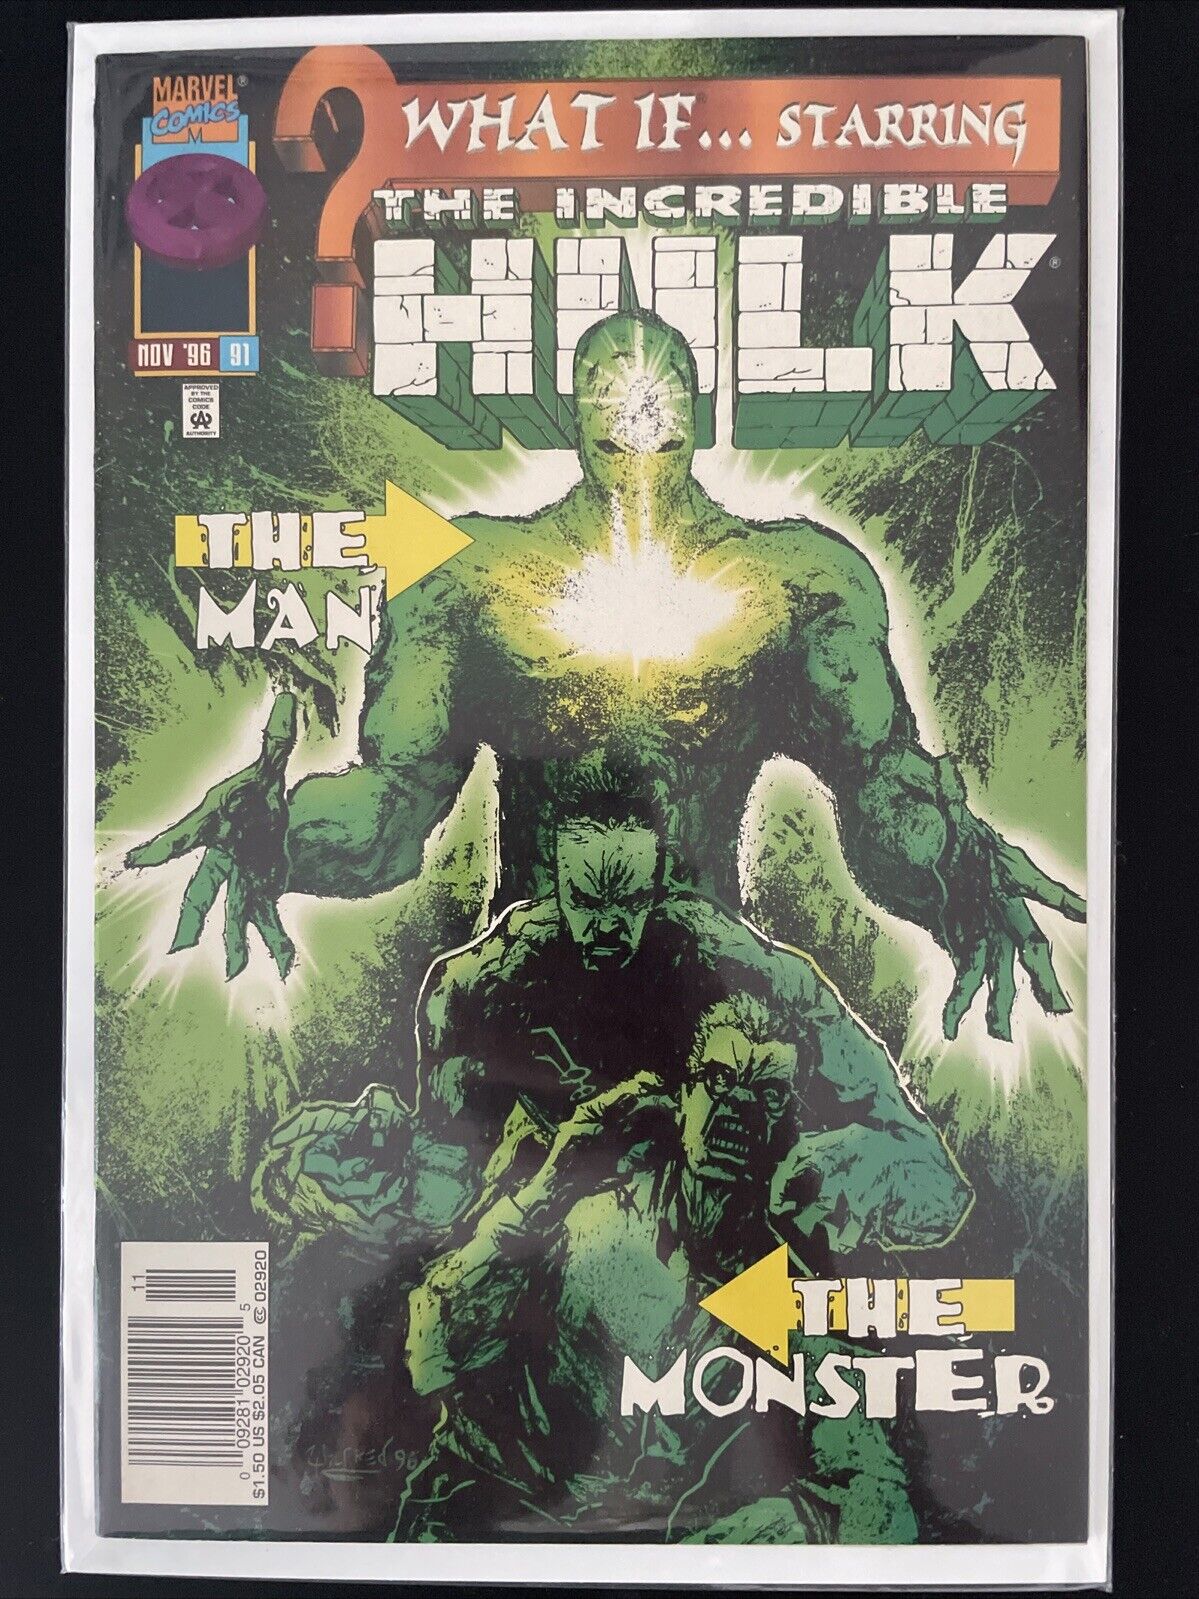 What If...? #91 (Marvel) Starring Incredible Hulk Newsstand Variant